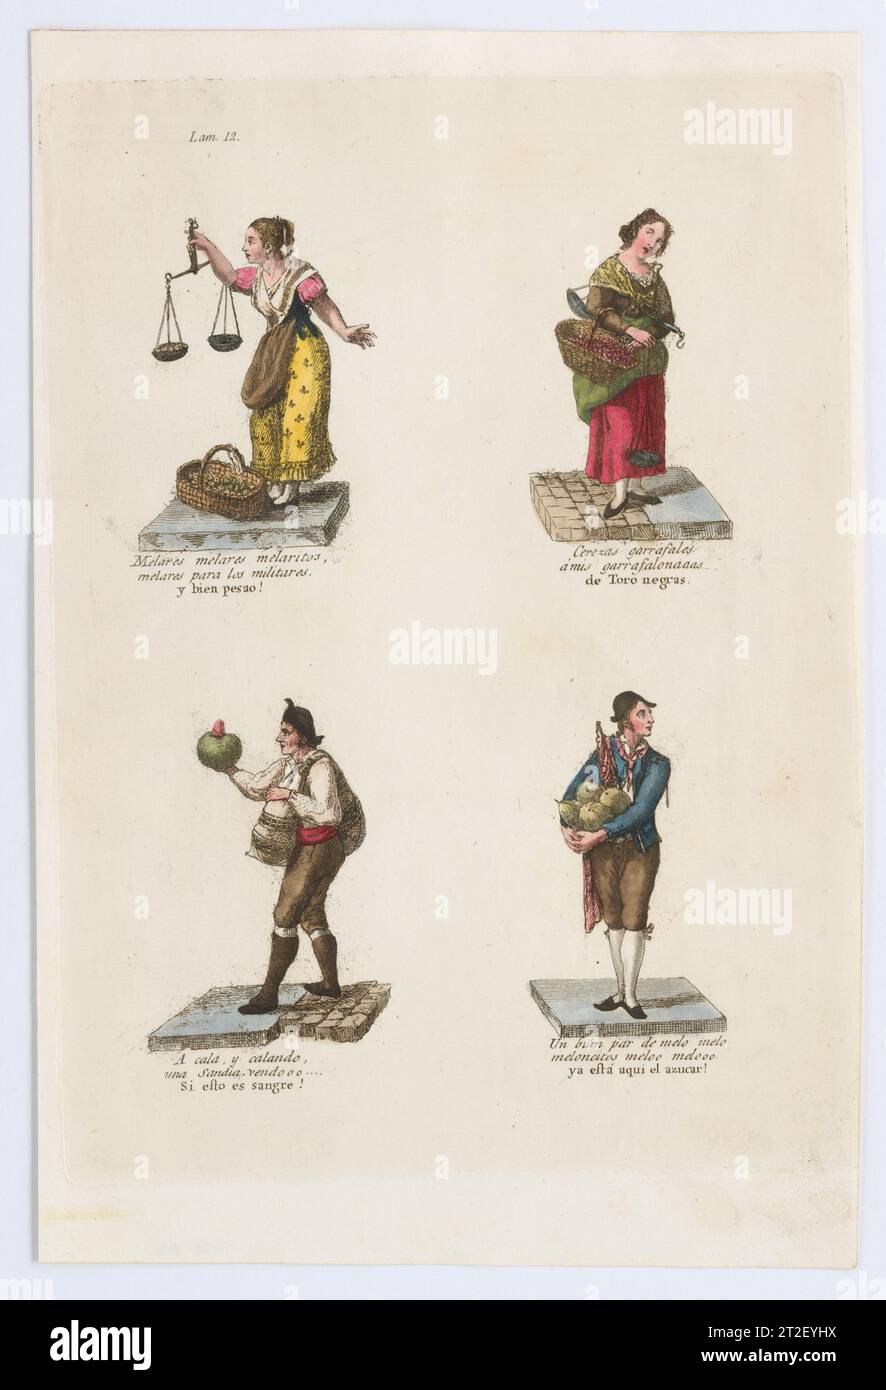 Plate 12: four street vendors from Madrid selling dried fruit, cherries, and melons, from 'Los Gritos de Madrid' (The Cries of Madrid) Miguel Gamborino Spanish Publisher Imprenta Real, Madrid Spanish 1809–17 See comment for 2022.53. View more. Plate 12: four street vendors from Madrid selling dried fruit, cherries, and melons, from 'Los Gritos de Madrid' (The Cries of Madrid). Miguel Gamborino (Spanish, Valencia 1760–1828 Madrid). 1809–17. Engraving with hand coloring. Imprenta Real, Madrid. Prints Stock Photo